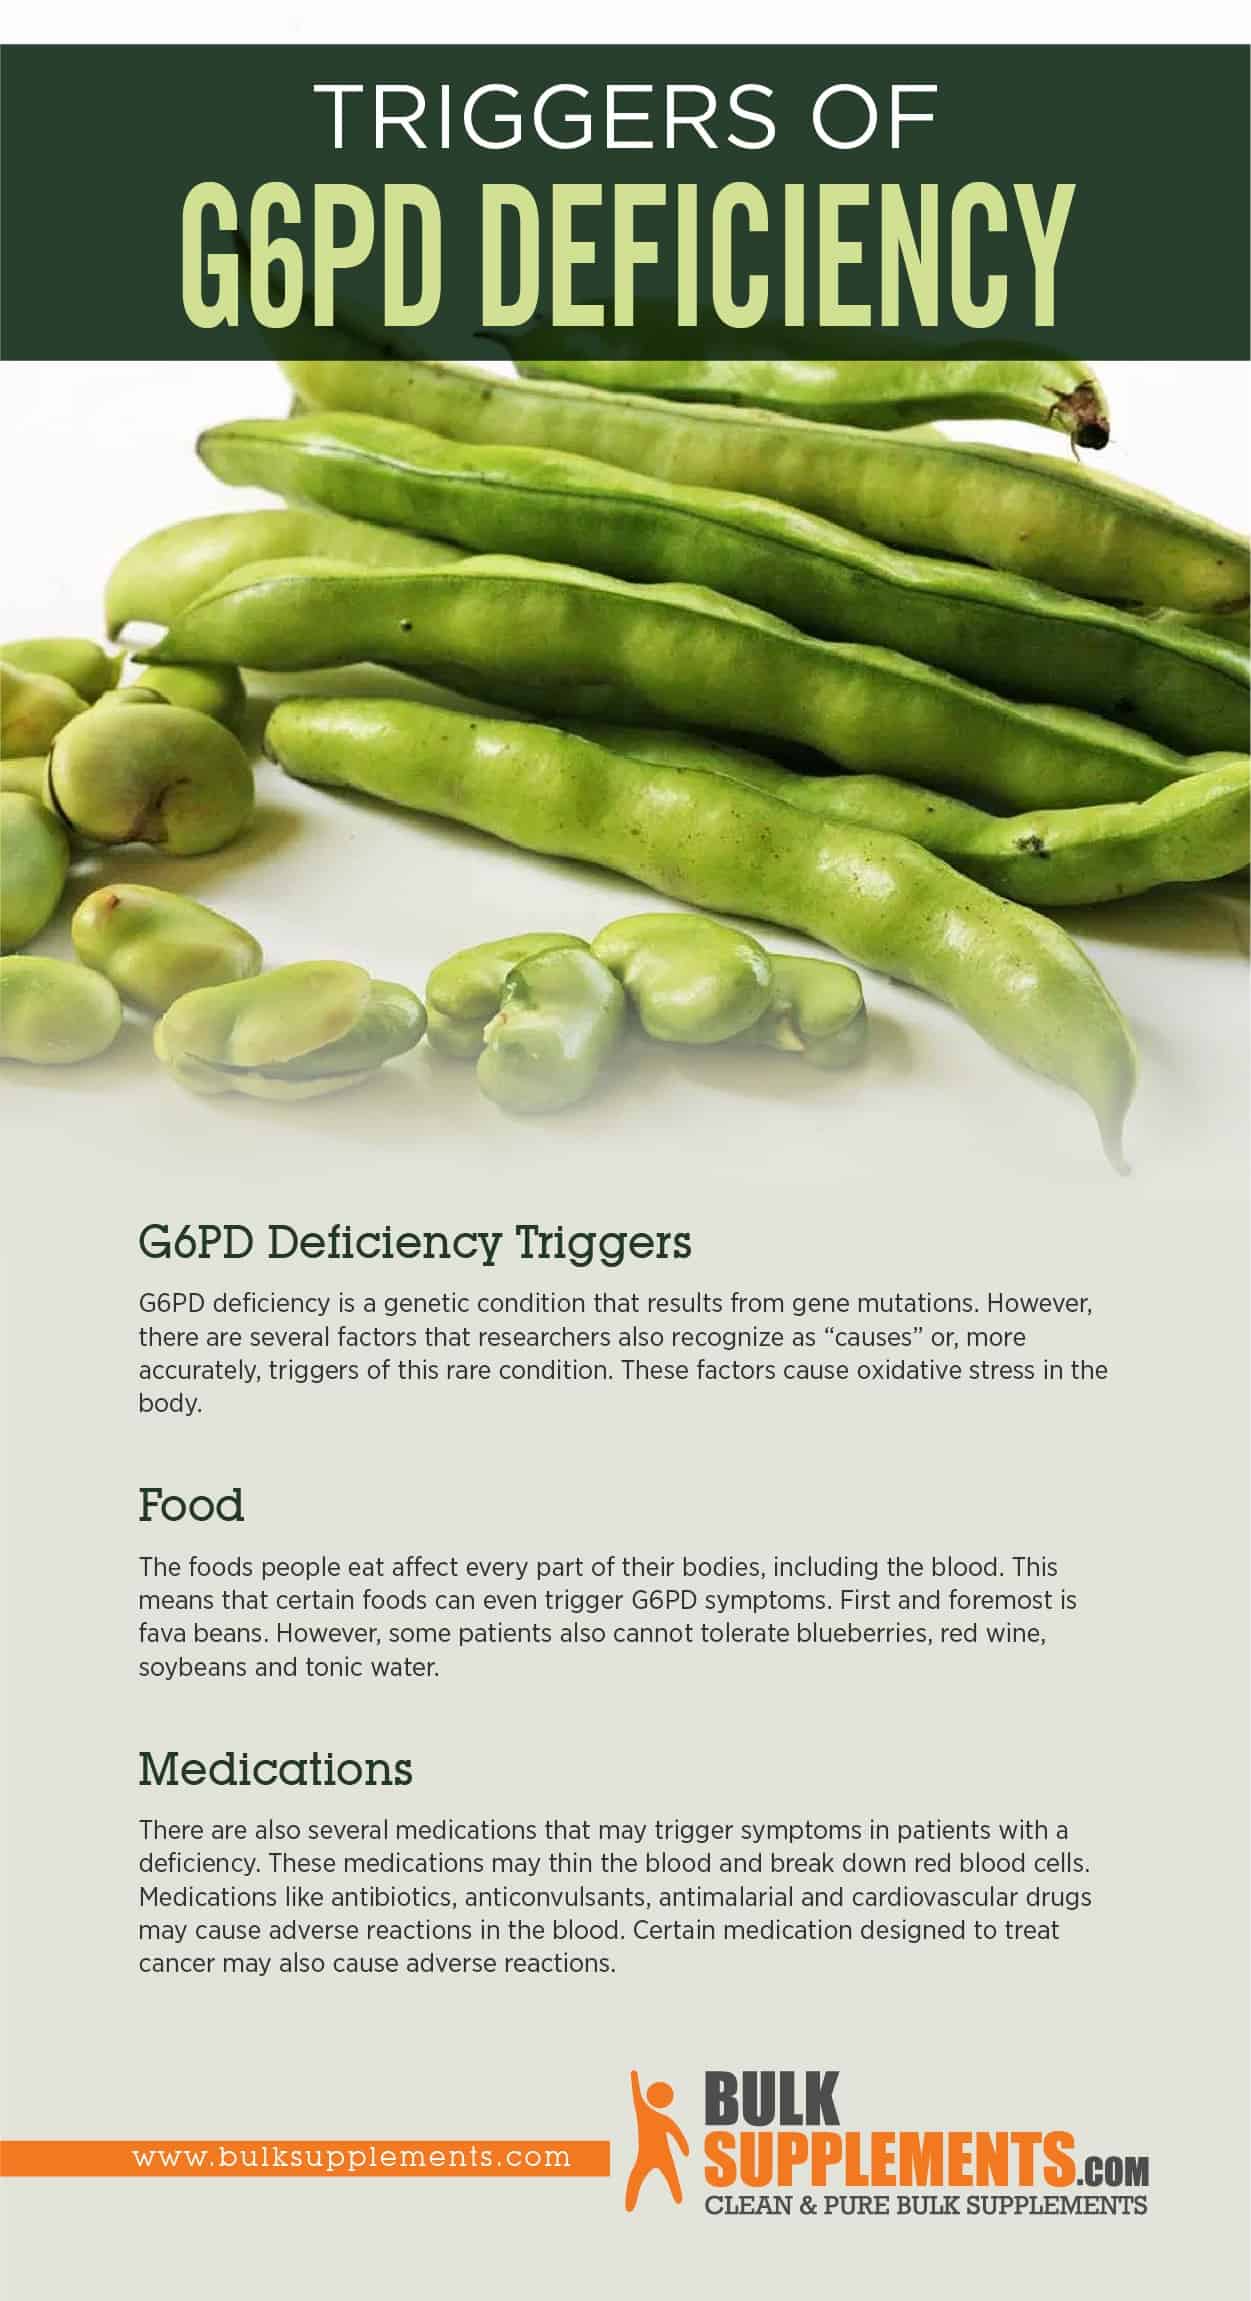 Triggers of G6PD Deficiency